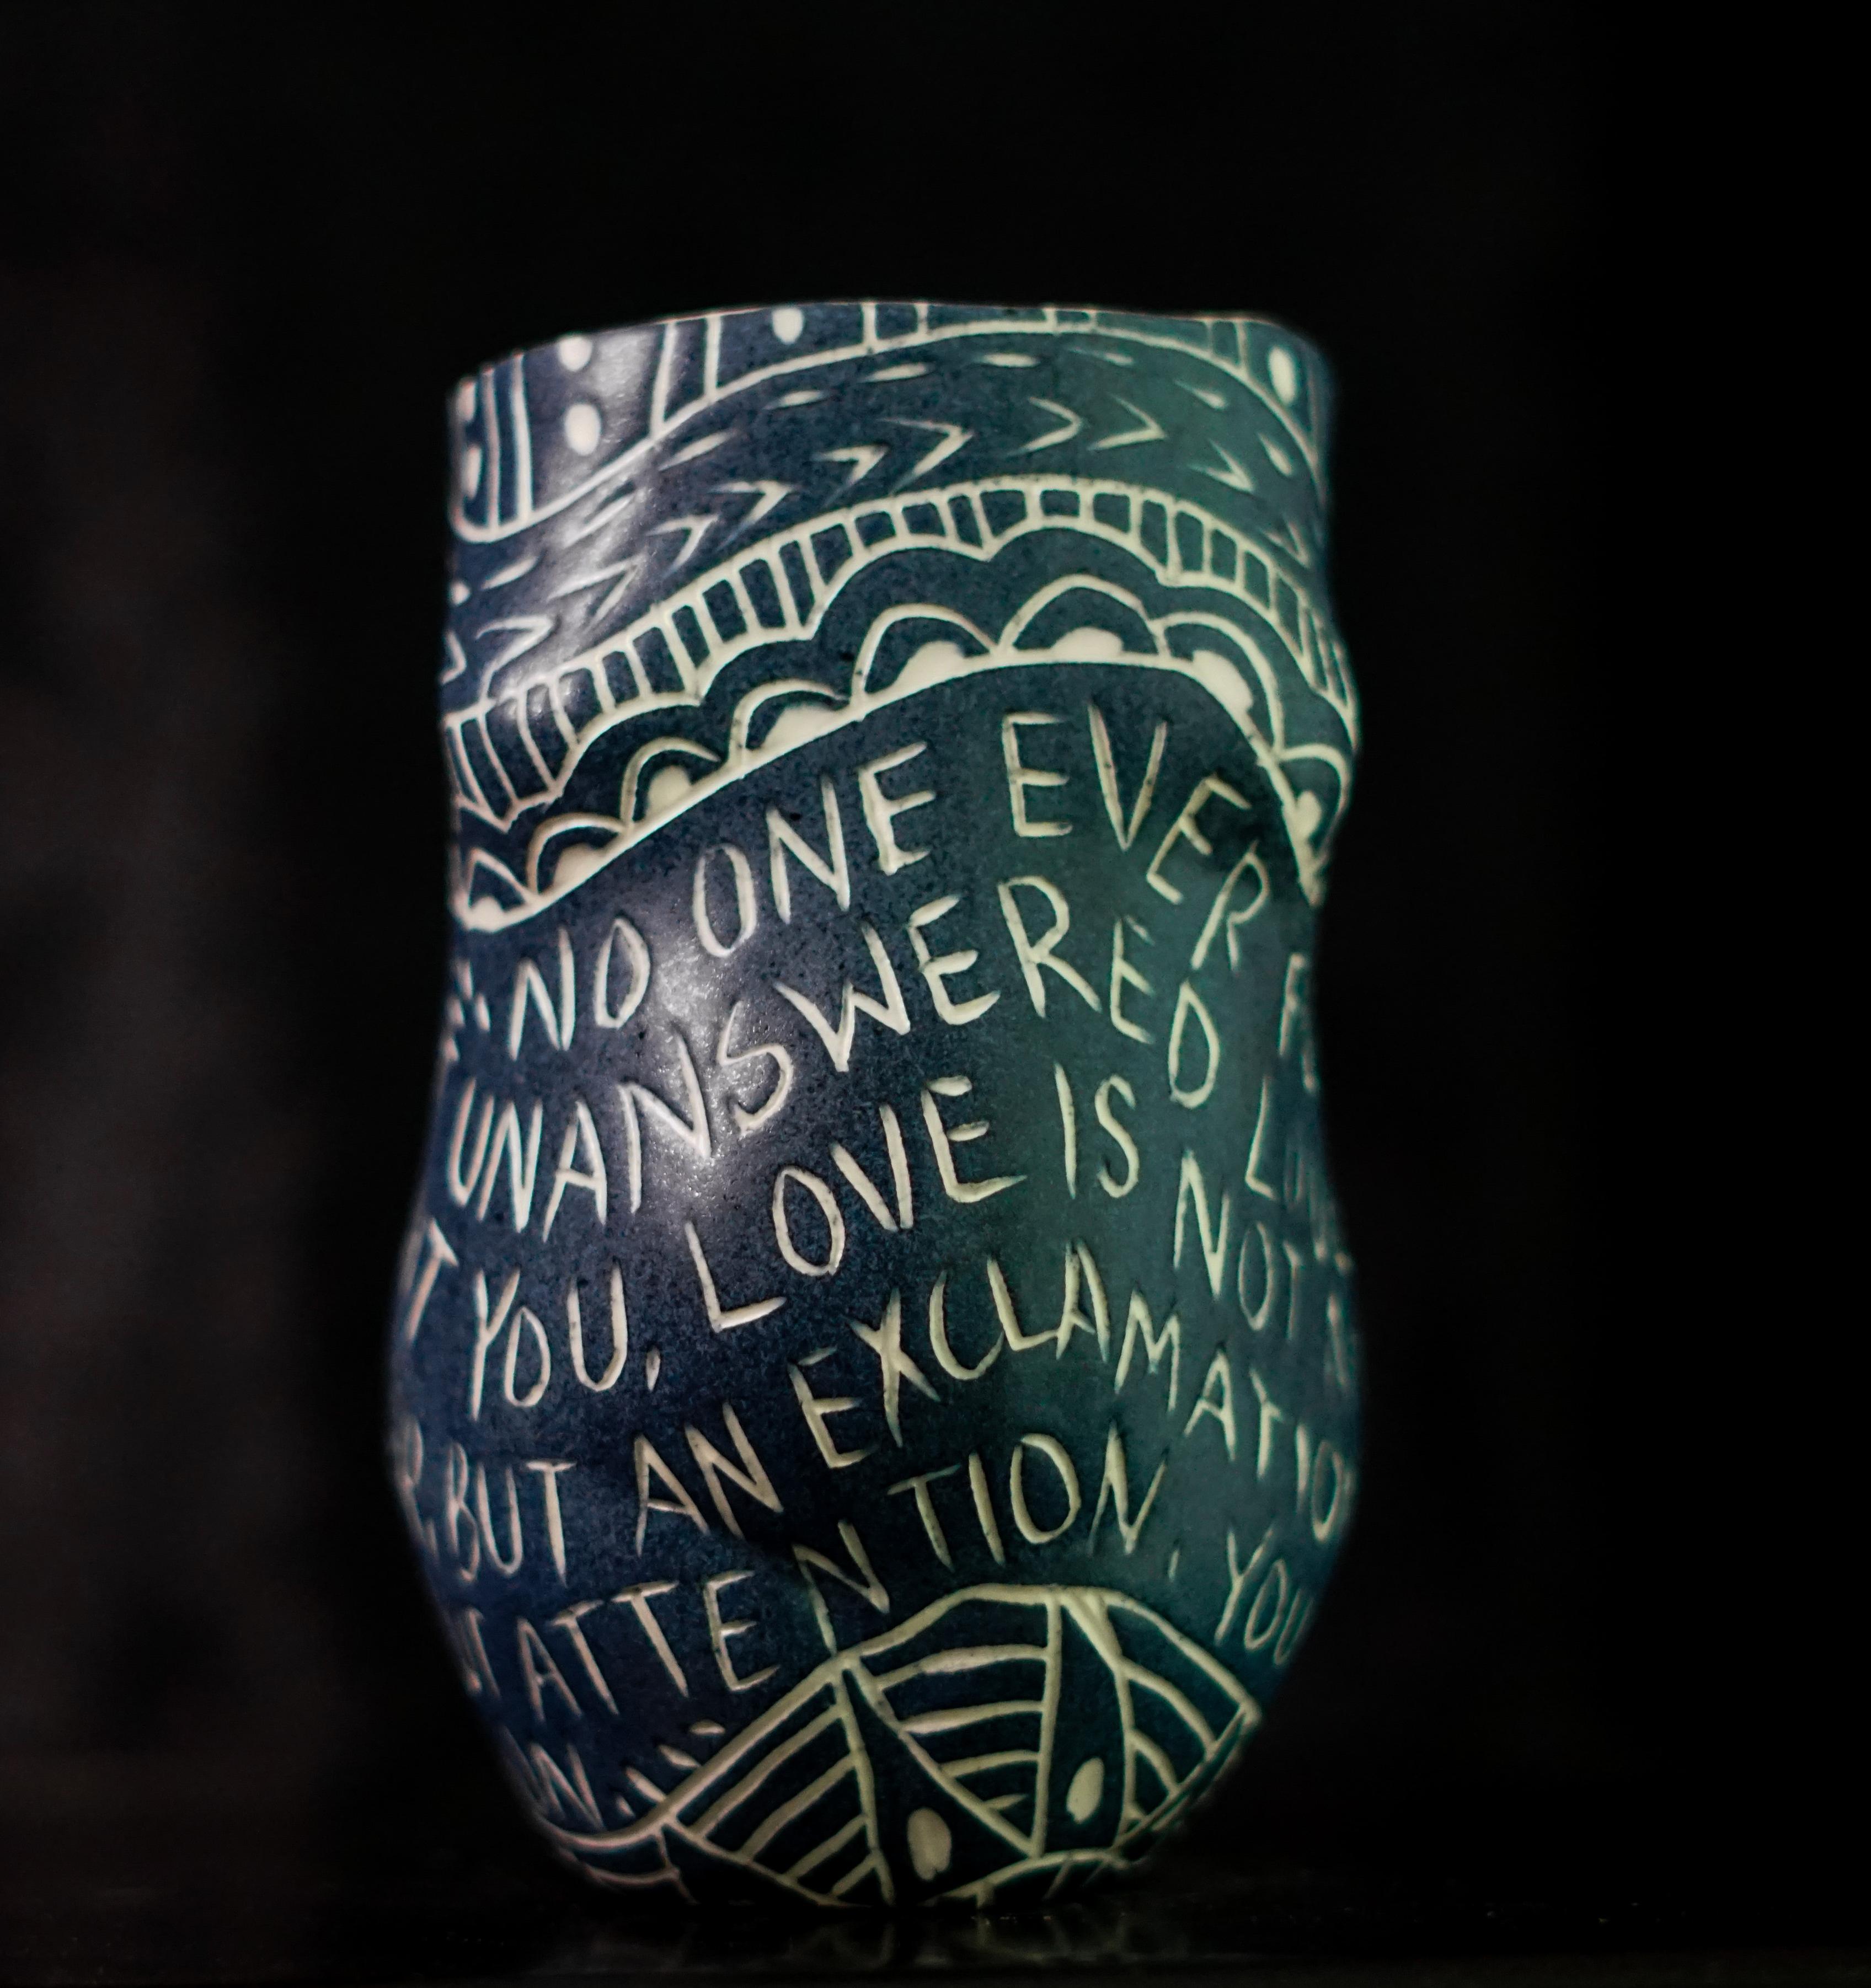 “No One Ever Fed You...” Porcelain cup with sgraffito detailing by the artist